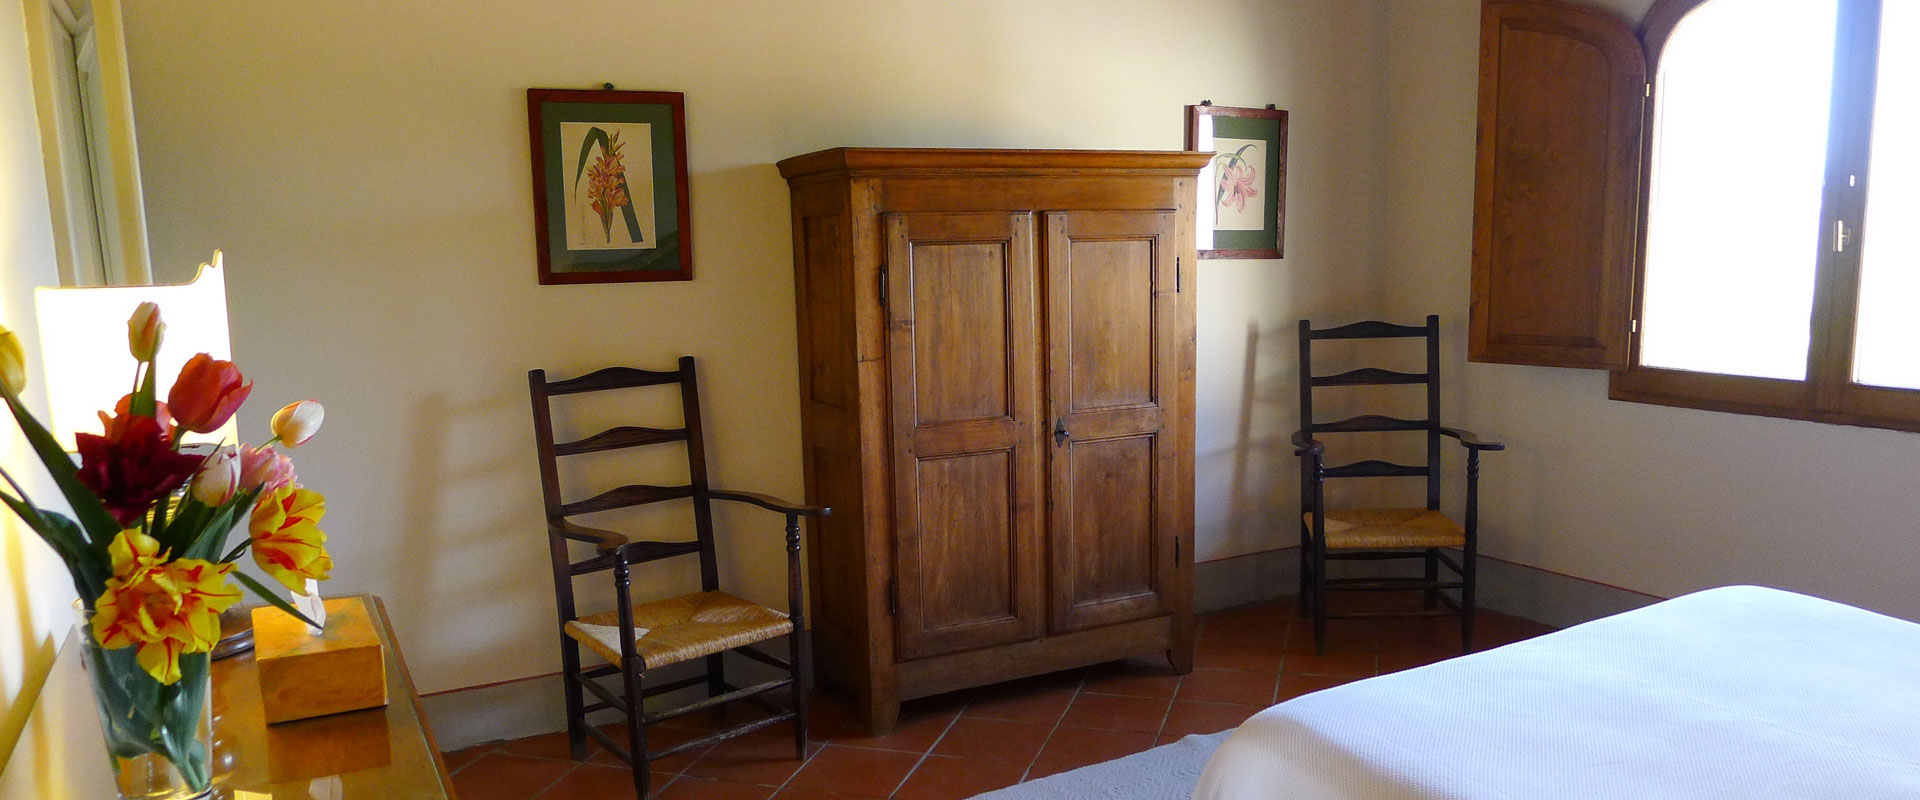 Apartment to rent in Chianti